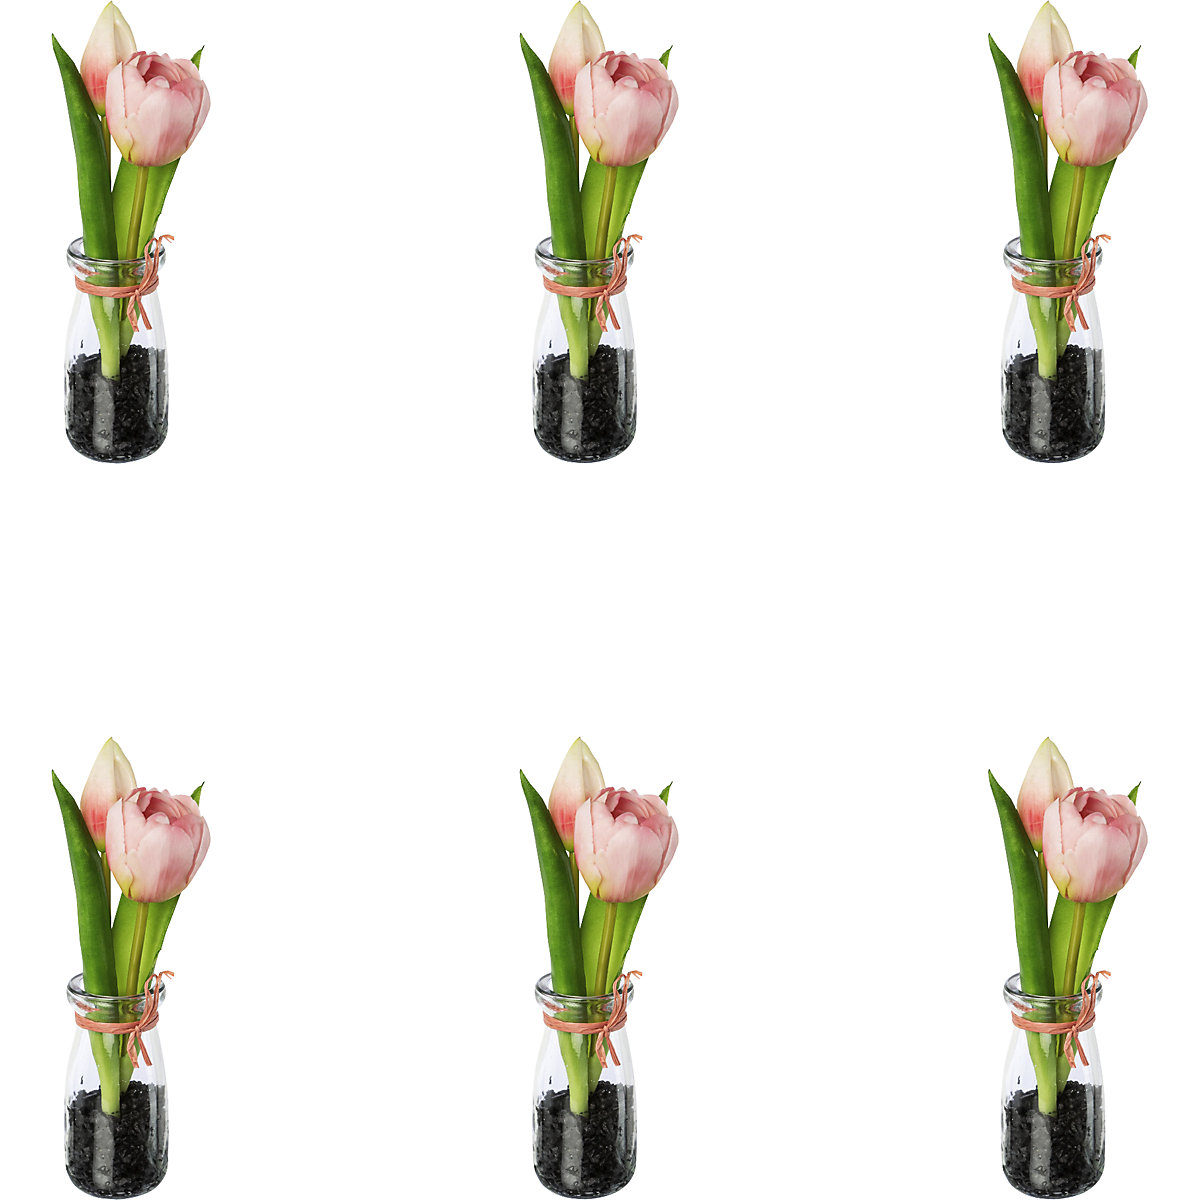 Tulips in a glass vase